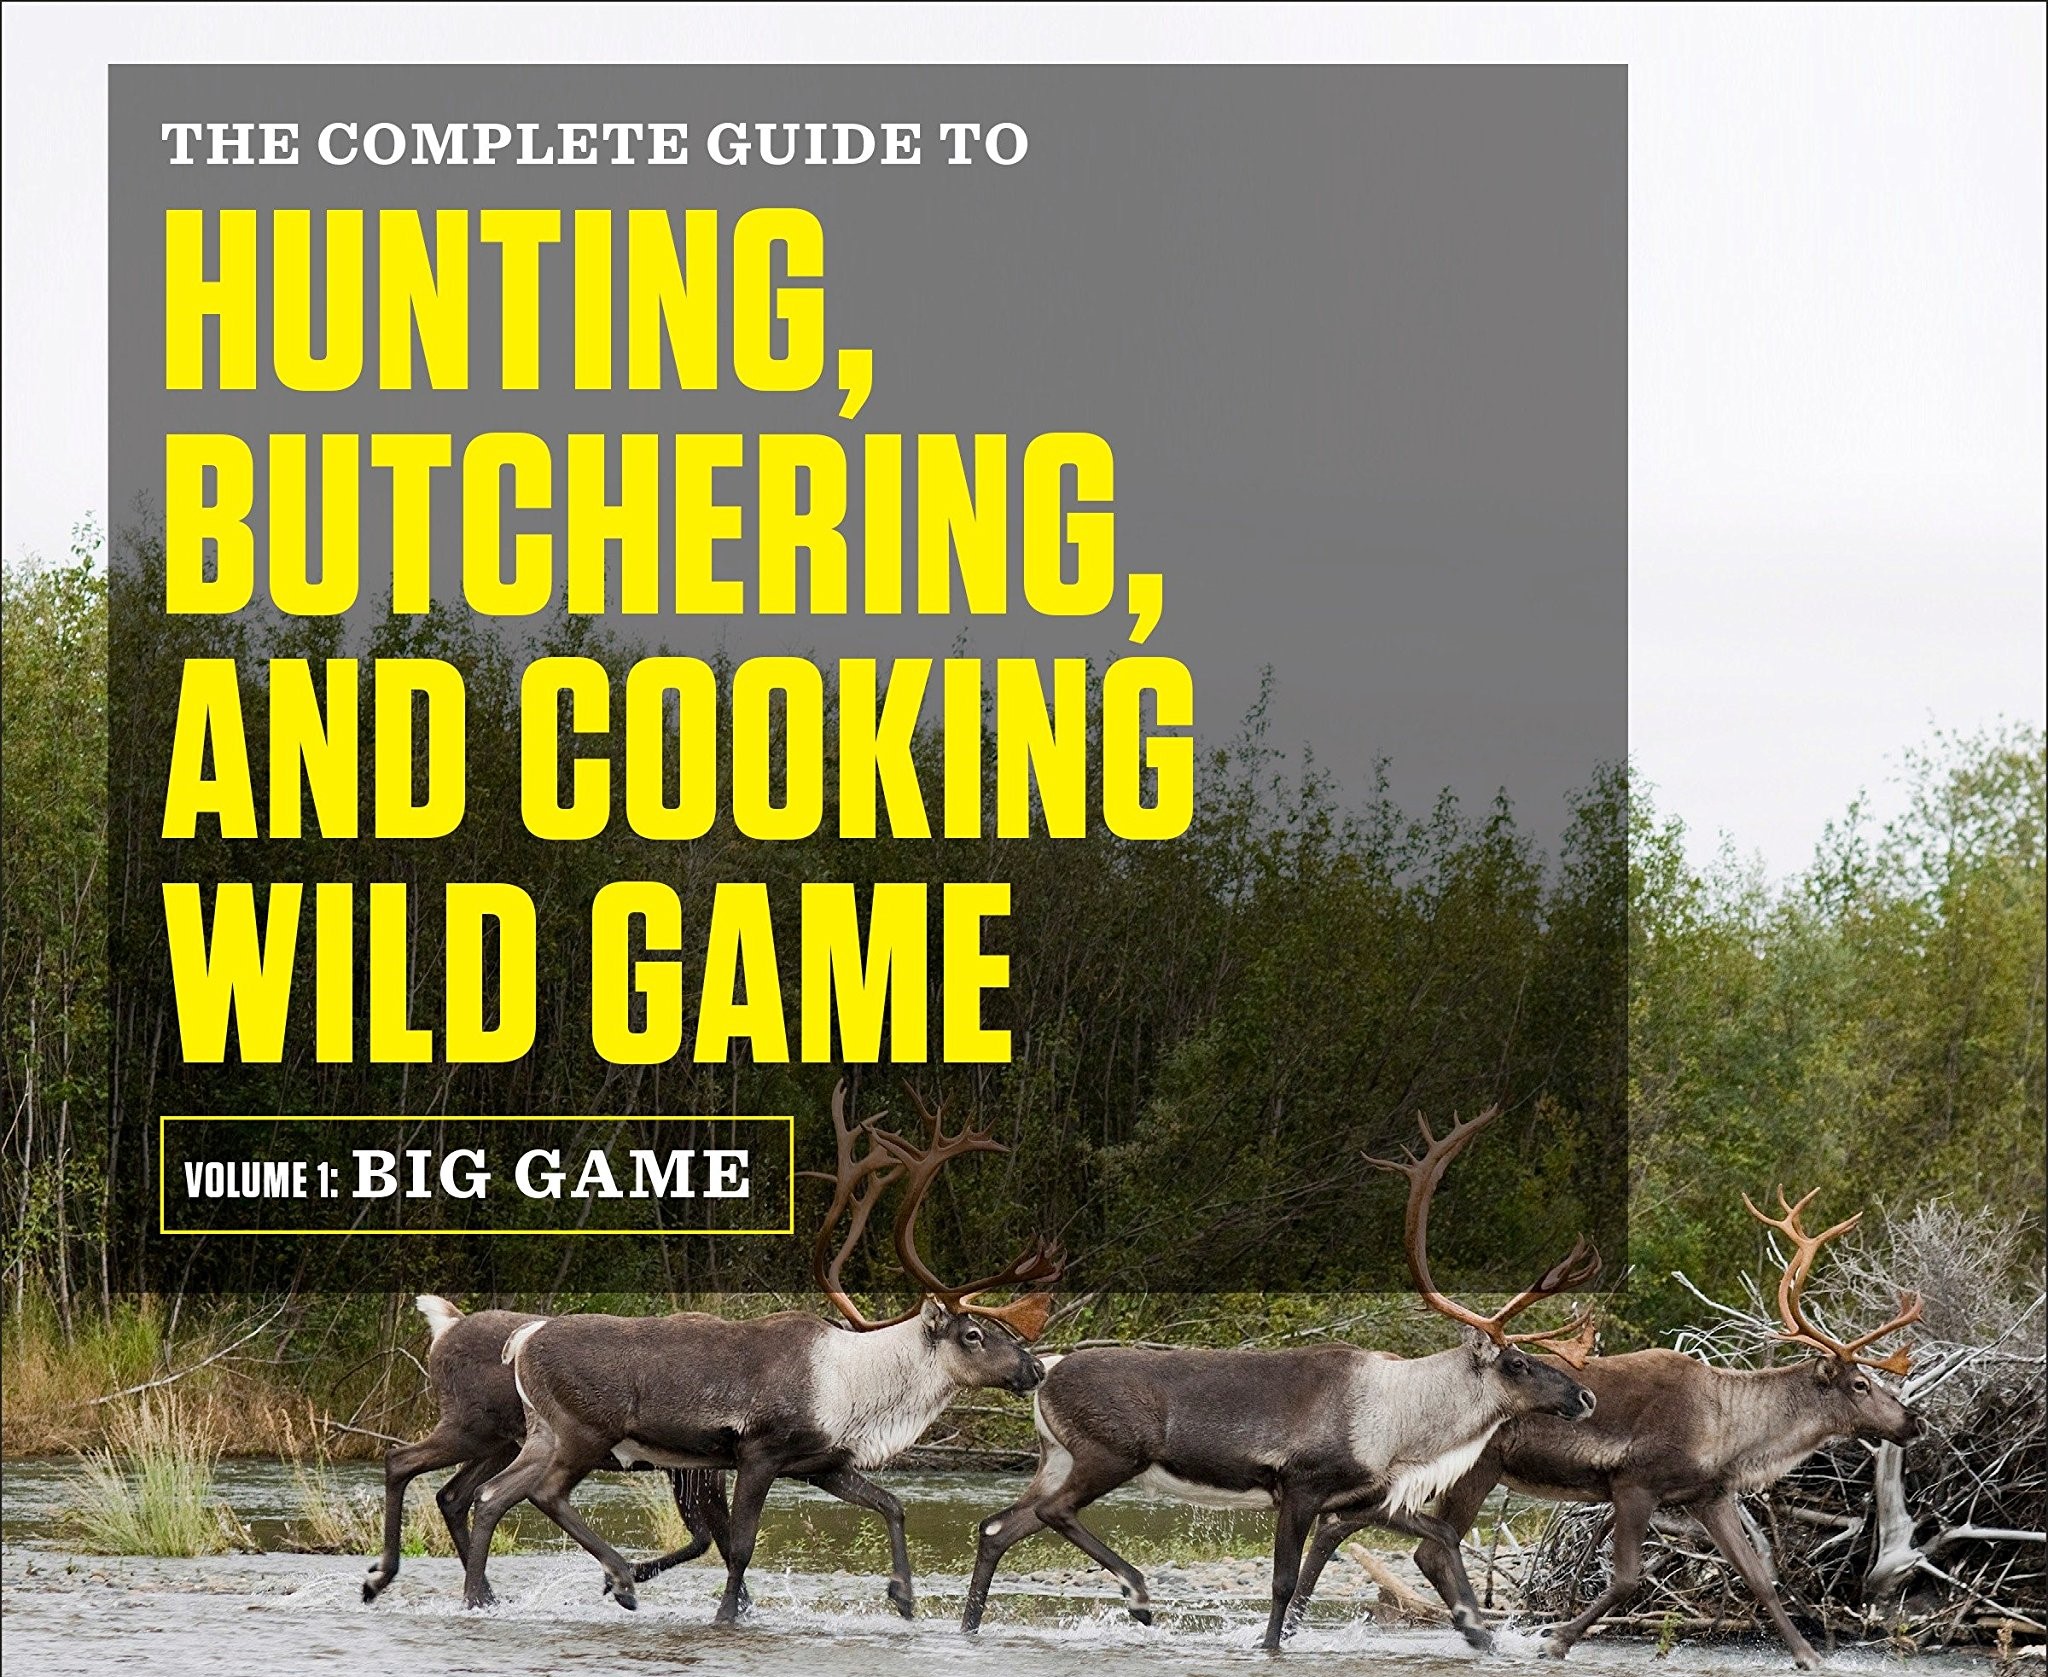 Book Review: Steven Rinella’s Complete Guide to Hunting